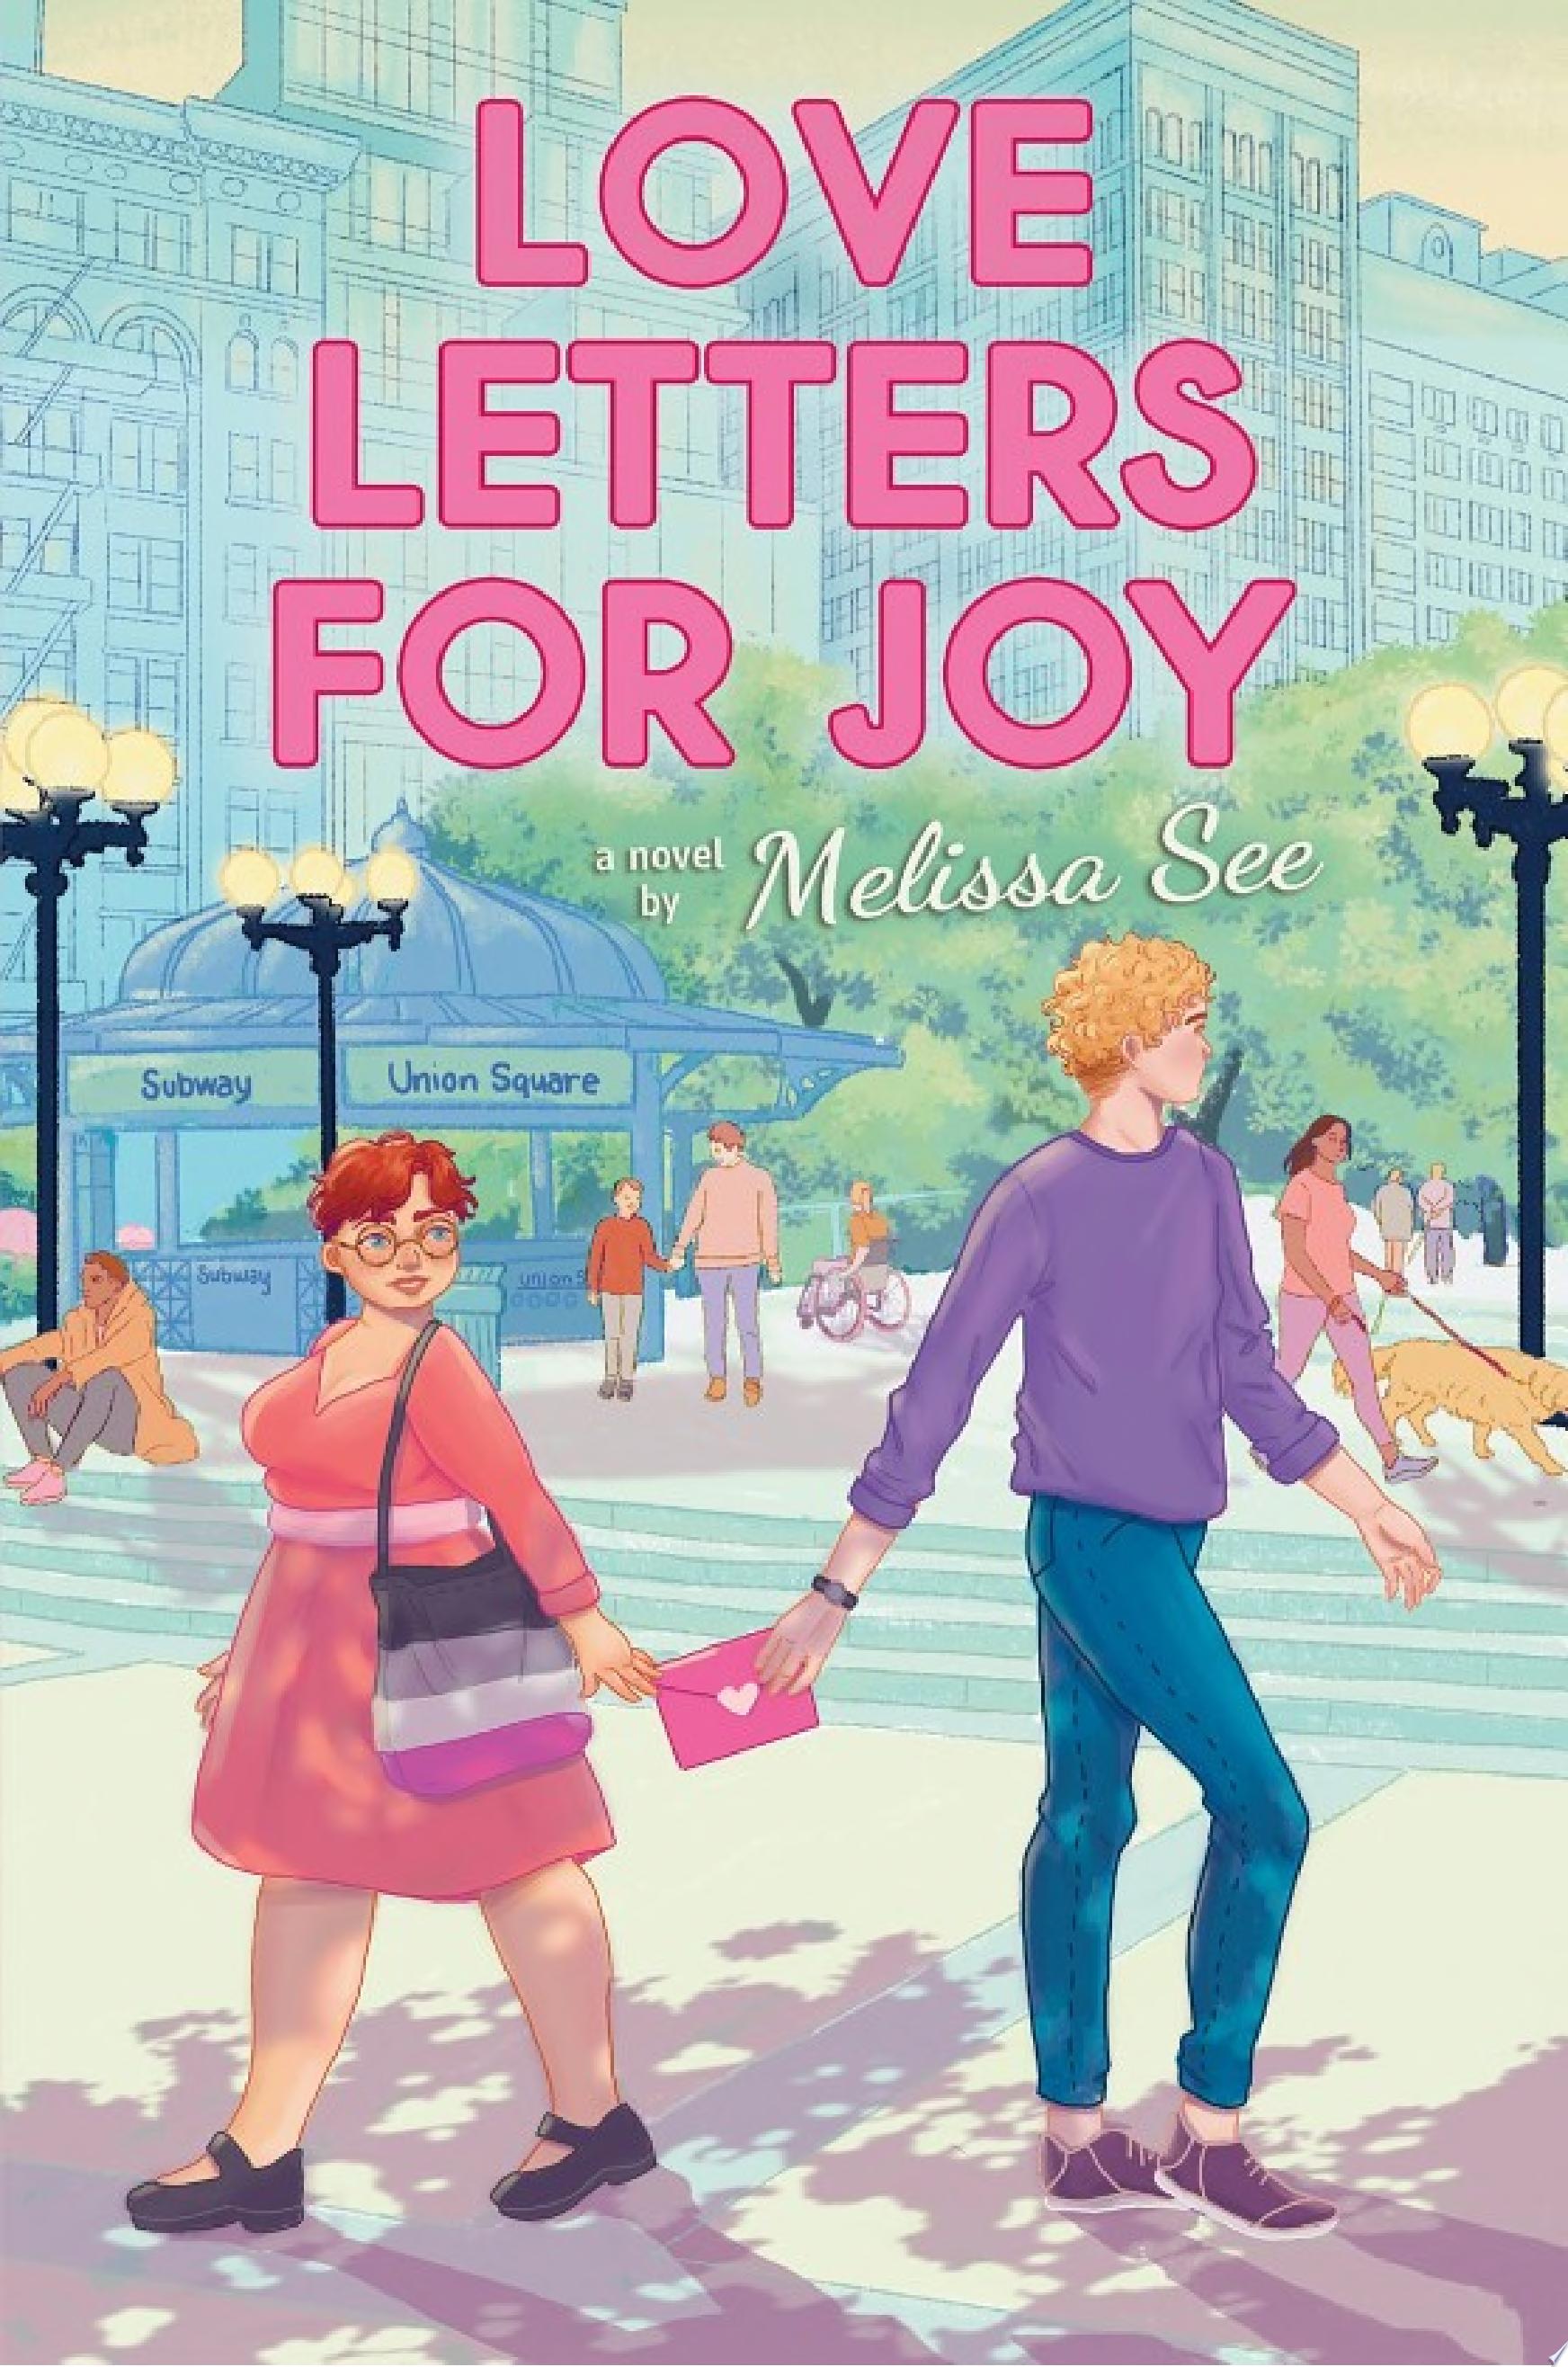 Image for "Love Letters for Joy"